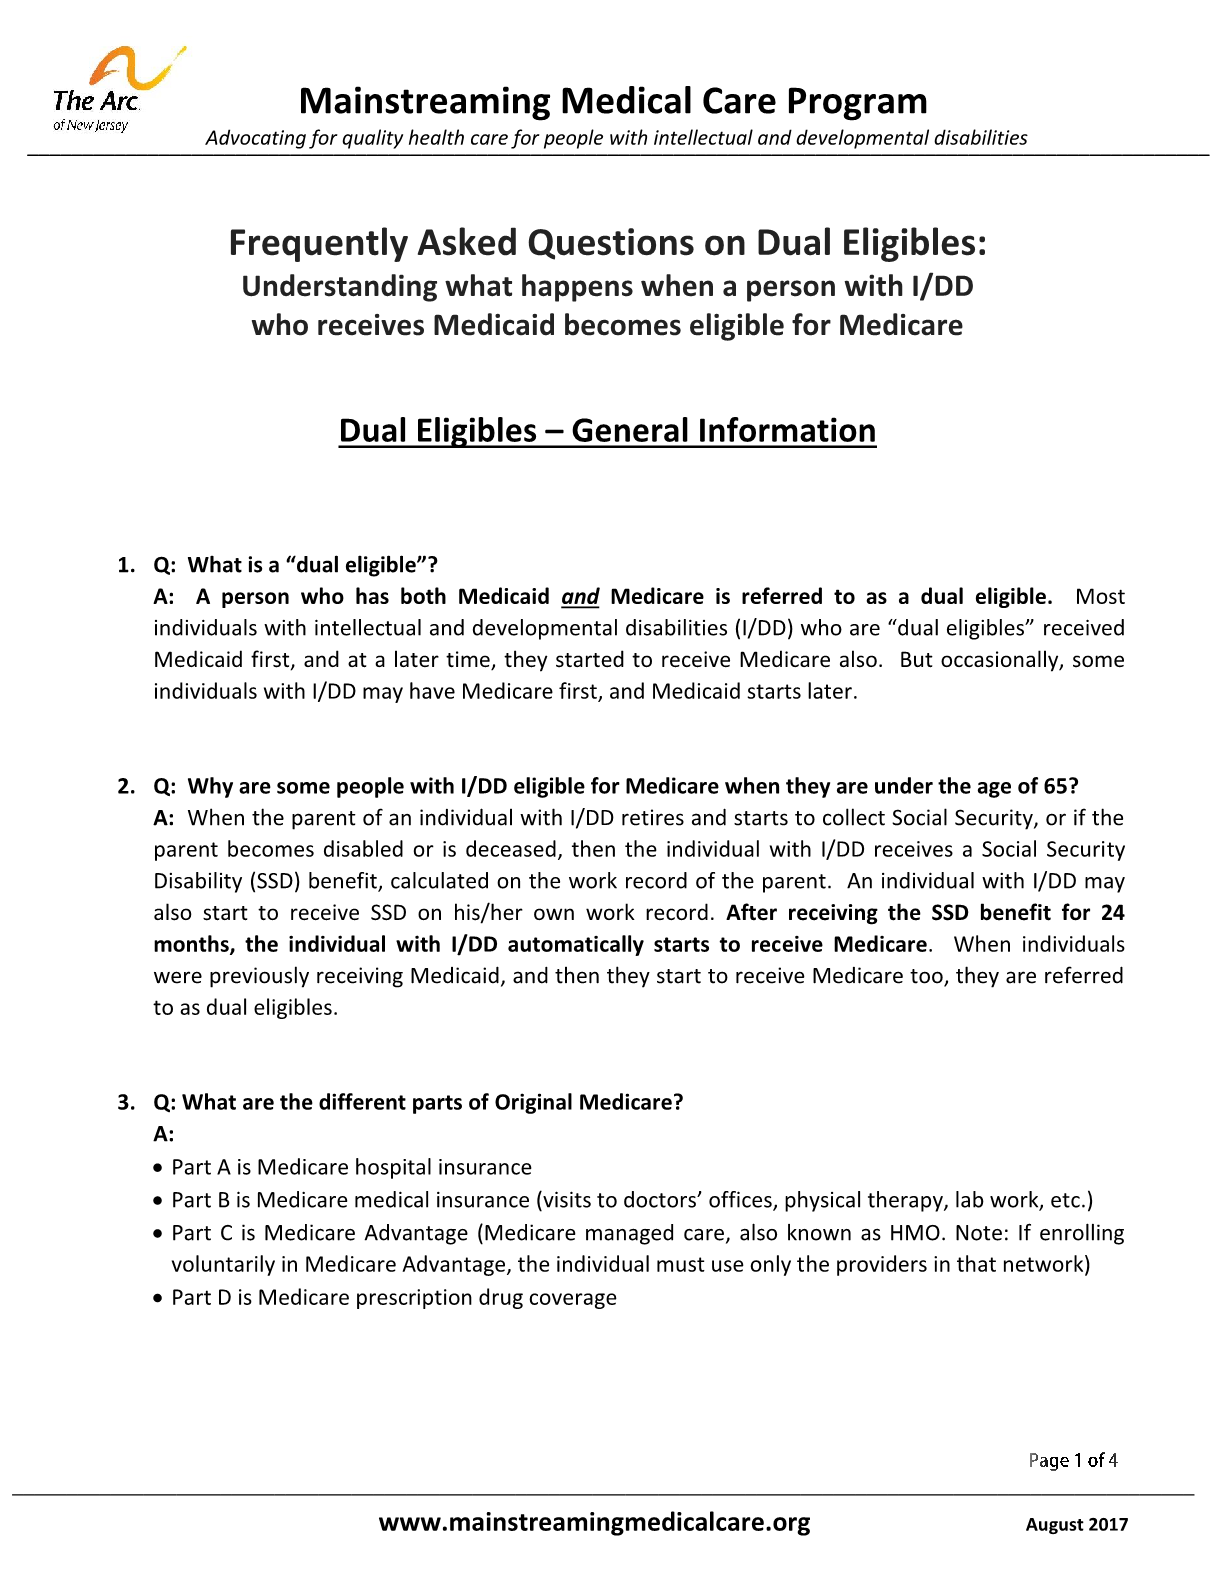 FAQ on Dual Eligibles: Understanding what happens when a person with IDD who receives Medicaid becomes eligible for Medicare - General Information